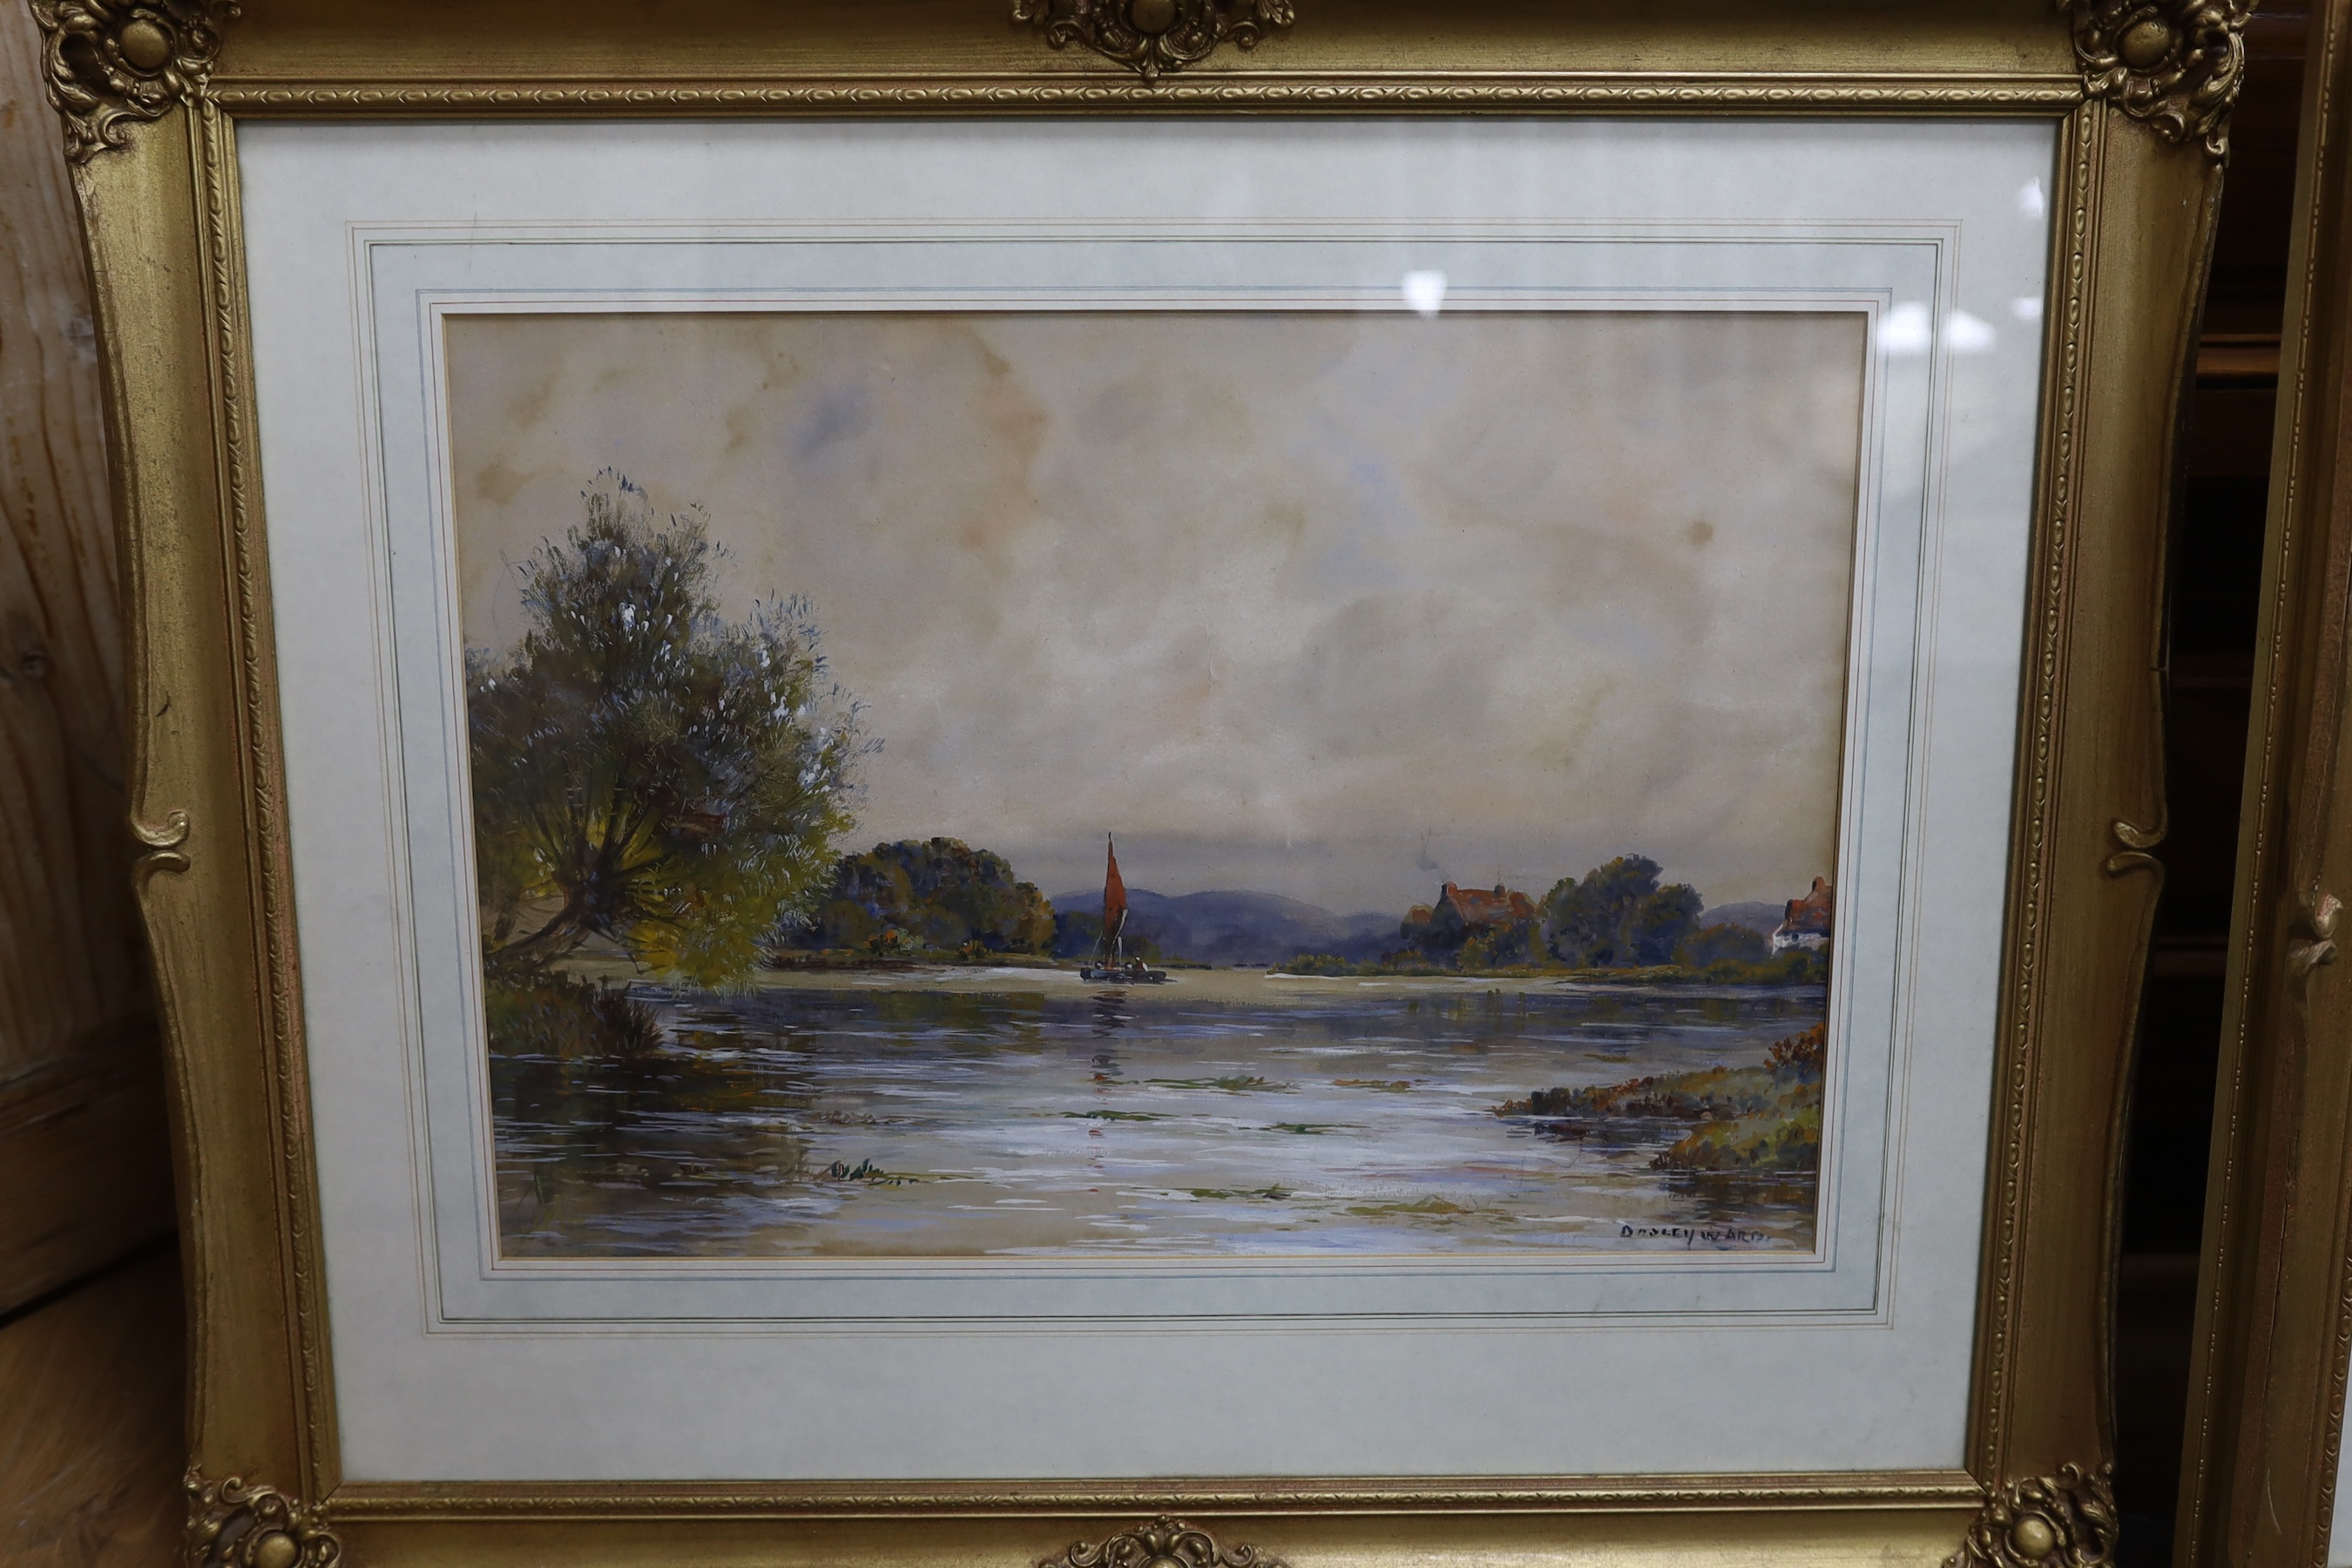 Dudley Ward (19/20th. C), pair of heightened watercolours, River landscapes, each signed, 34 x 48cm, gilt framed